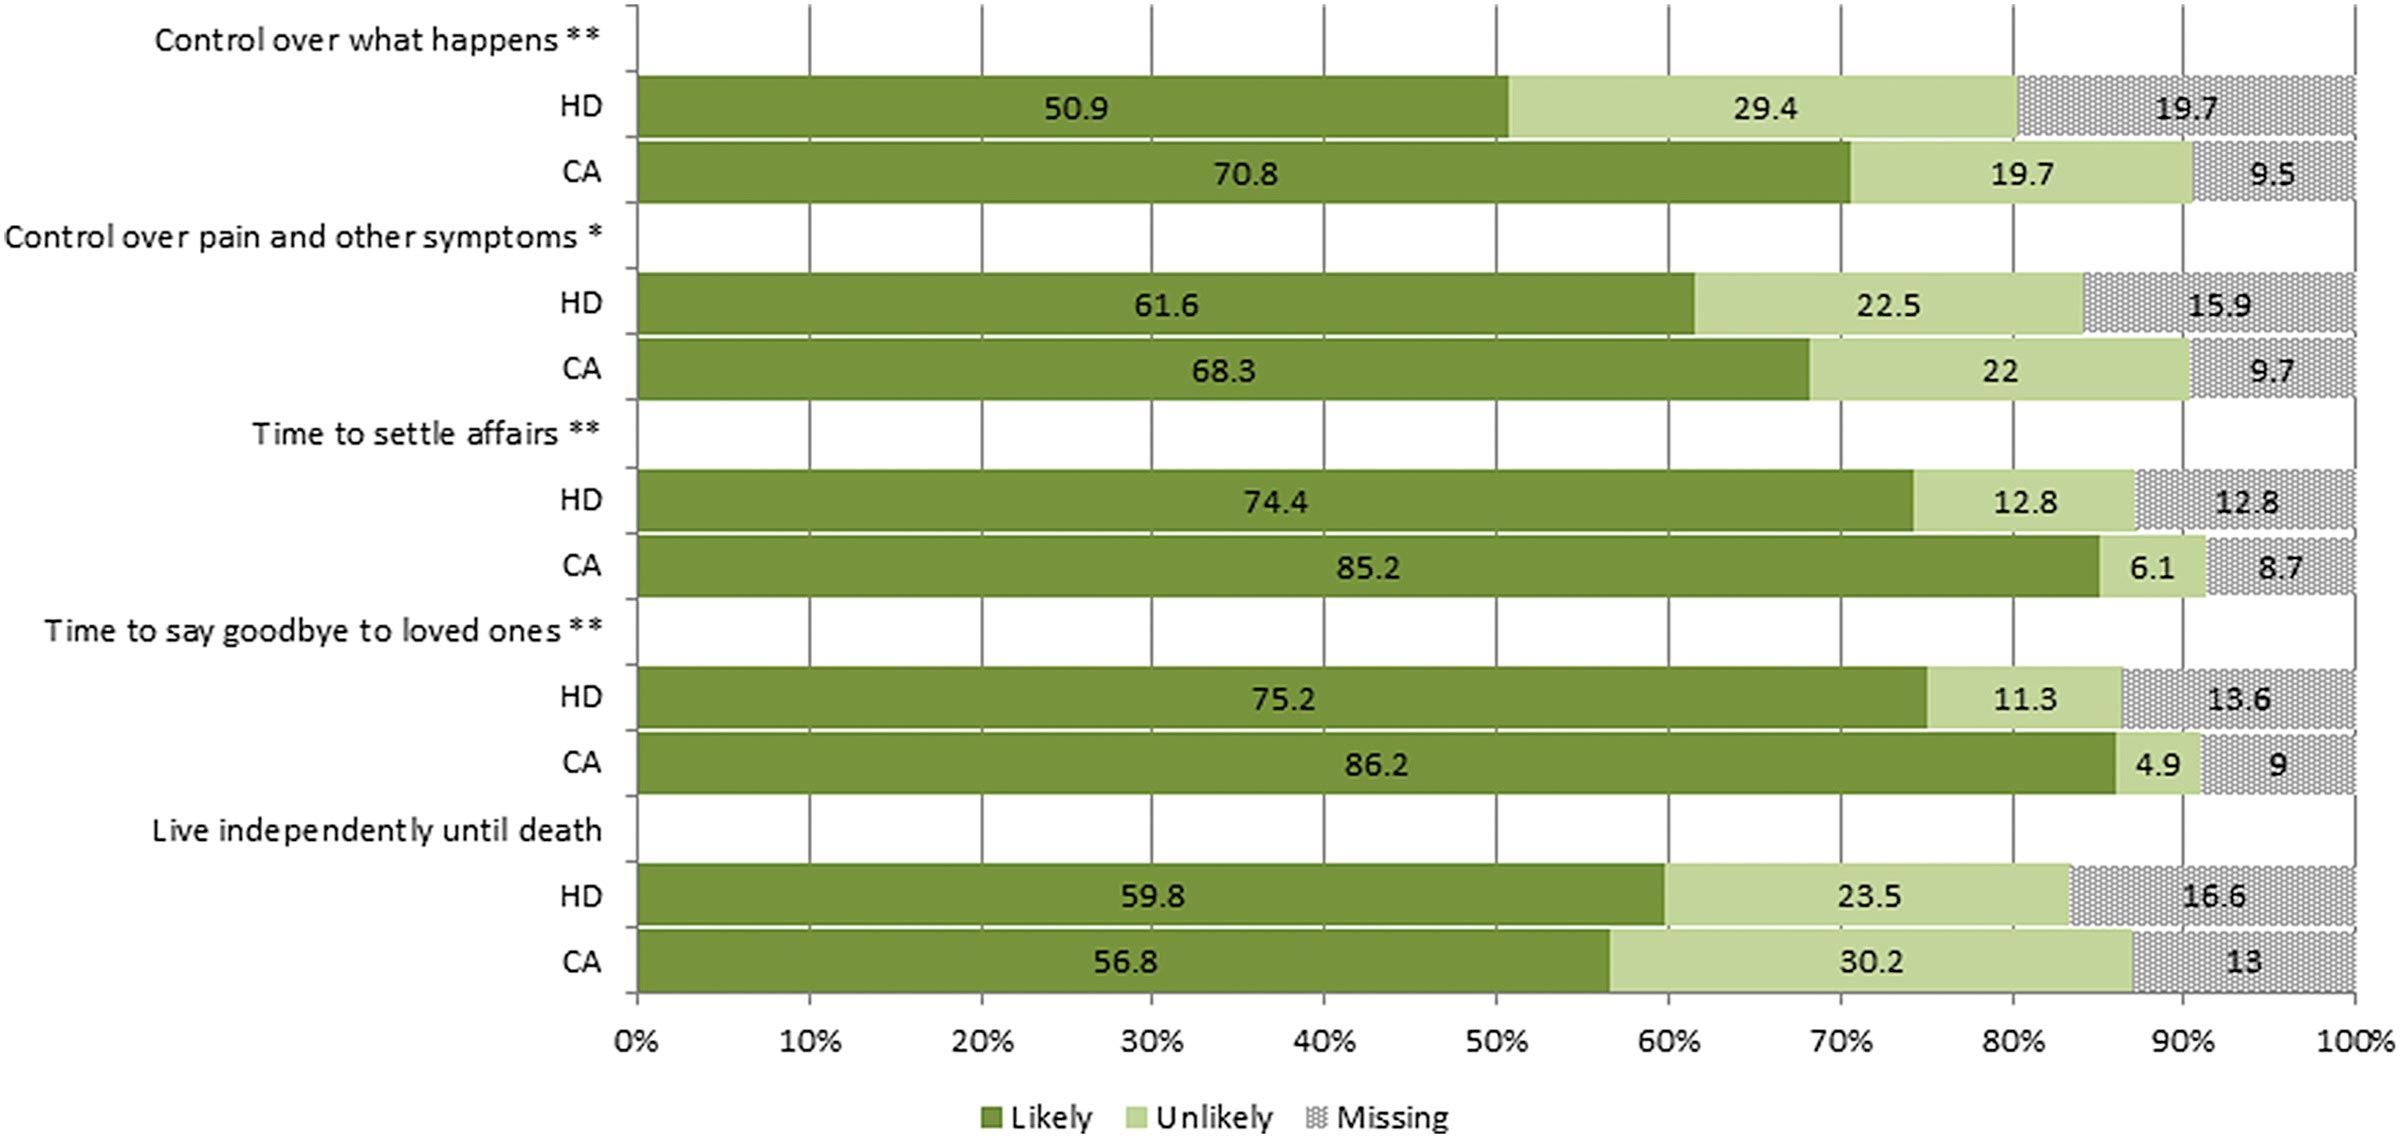 This survey of public attitudes among middle-aged and older people showed t...